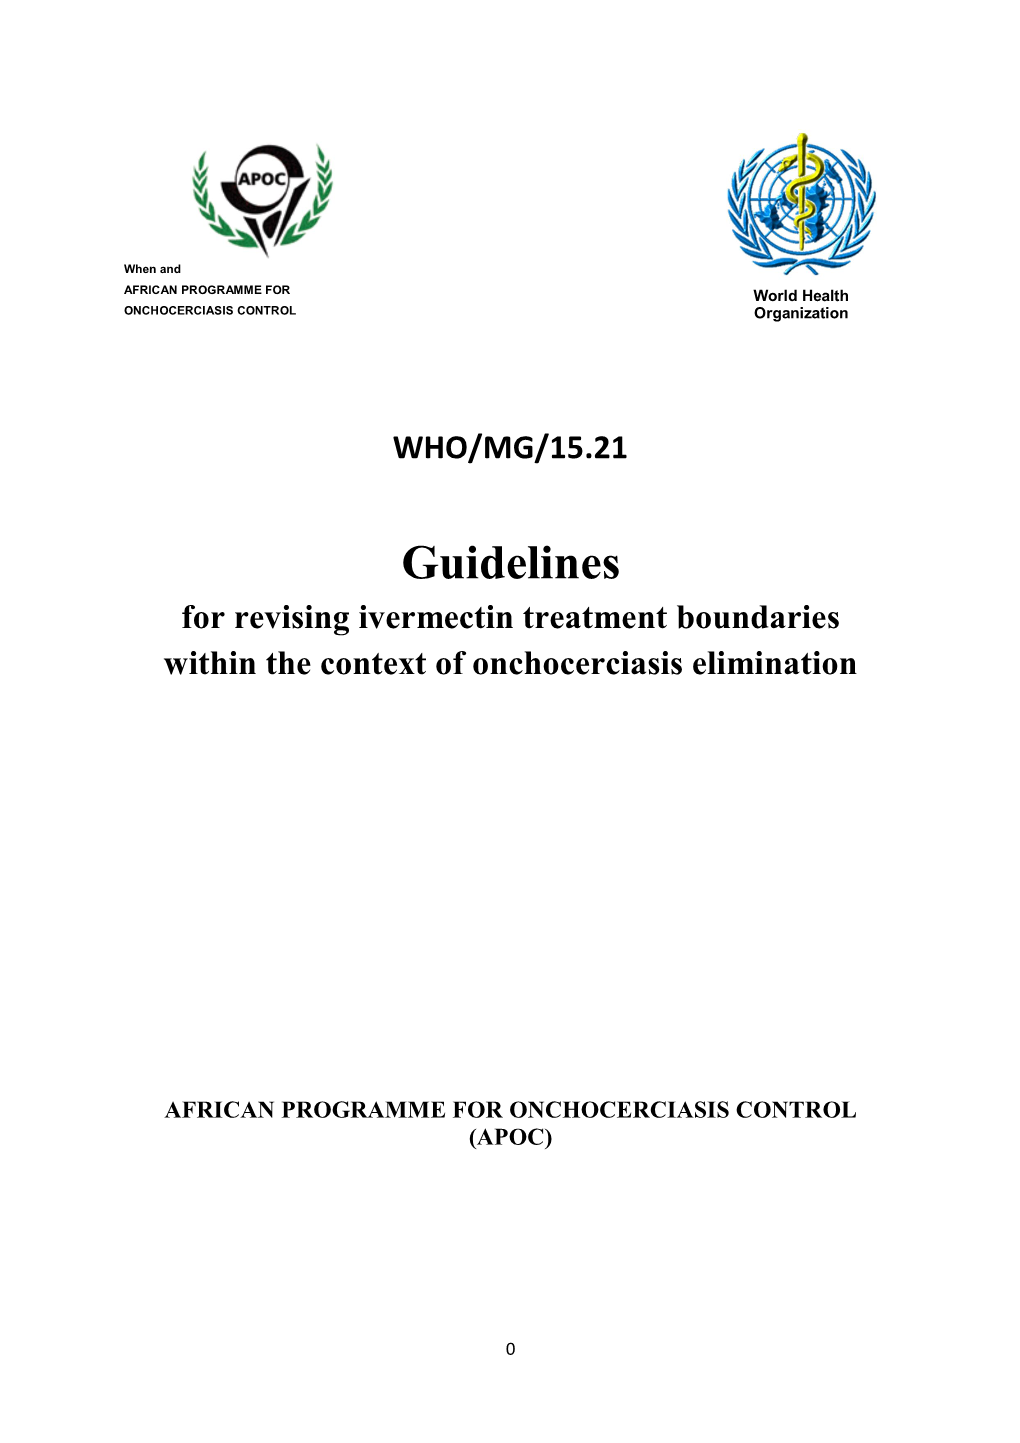 Guidelines for Revising Ivermectin Treatment Boundaries Within the Context of Onchocerciasis Elimination